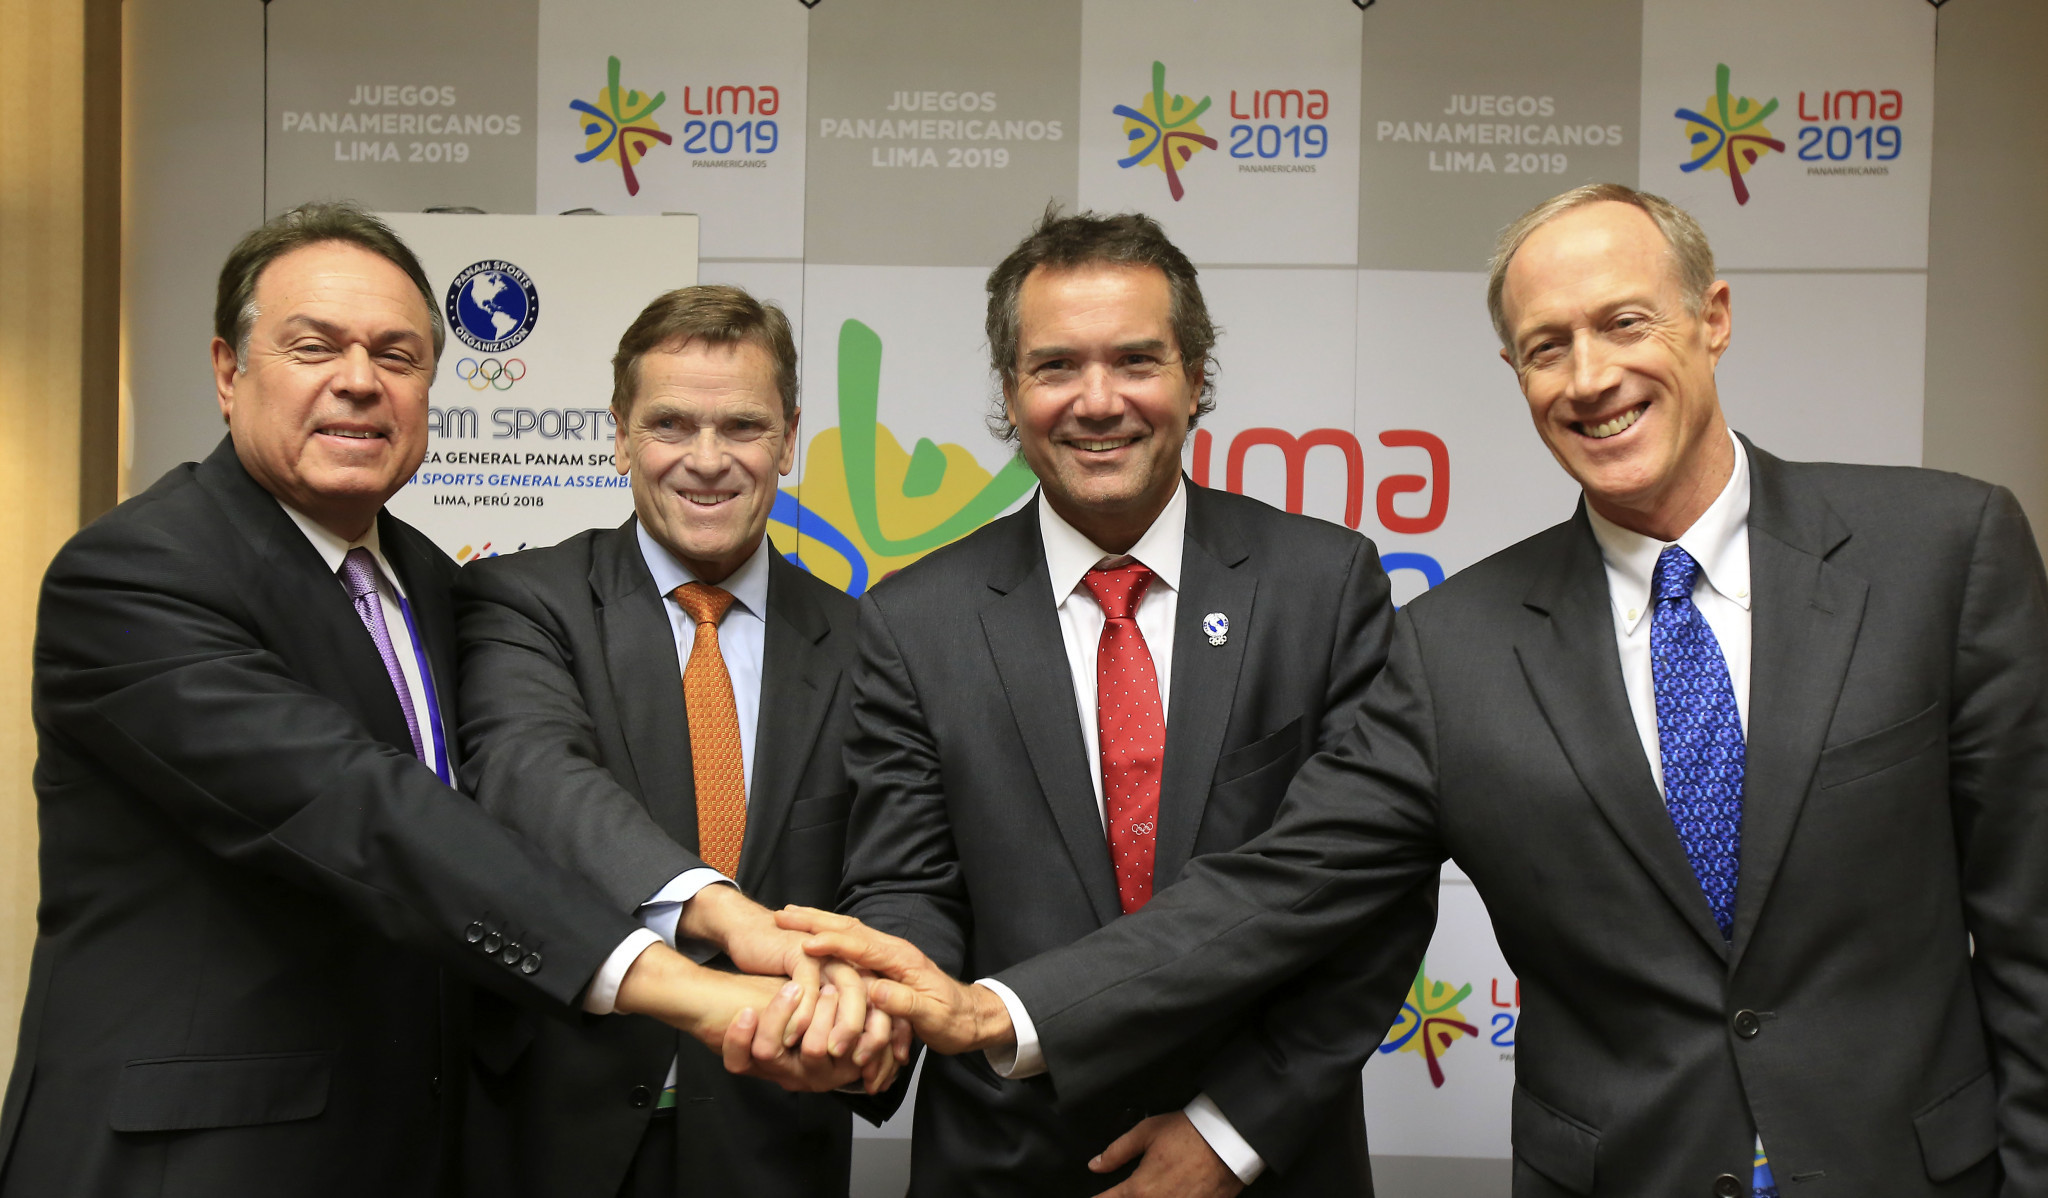 Panam Sports have sought to provide guidance for Lima 2019 but provided probing questions for the organisers ©Lima 2019